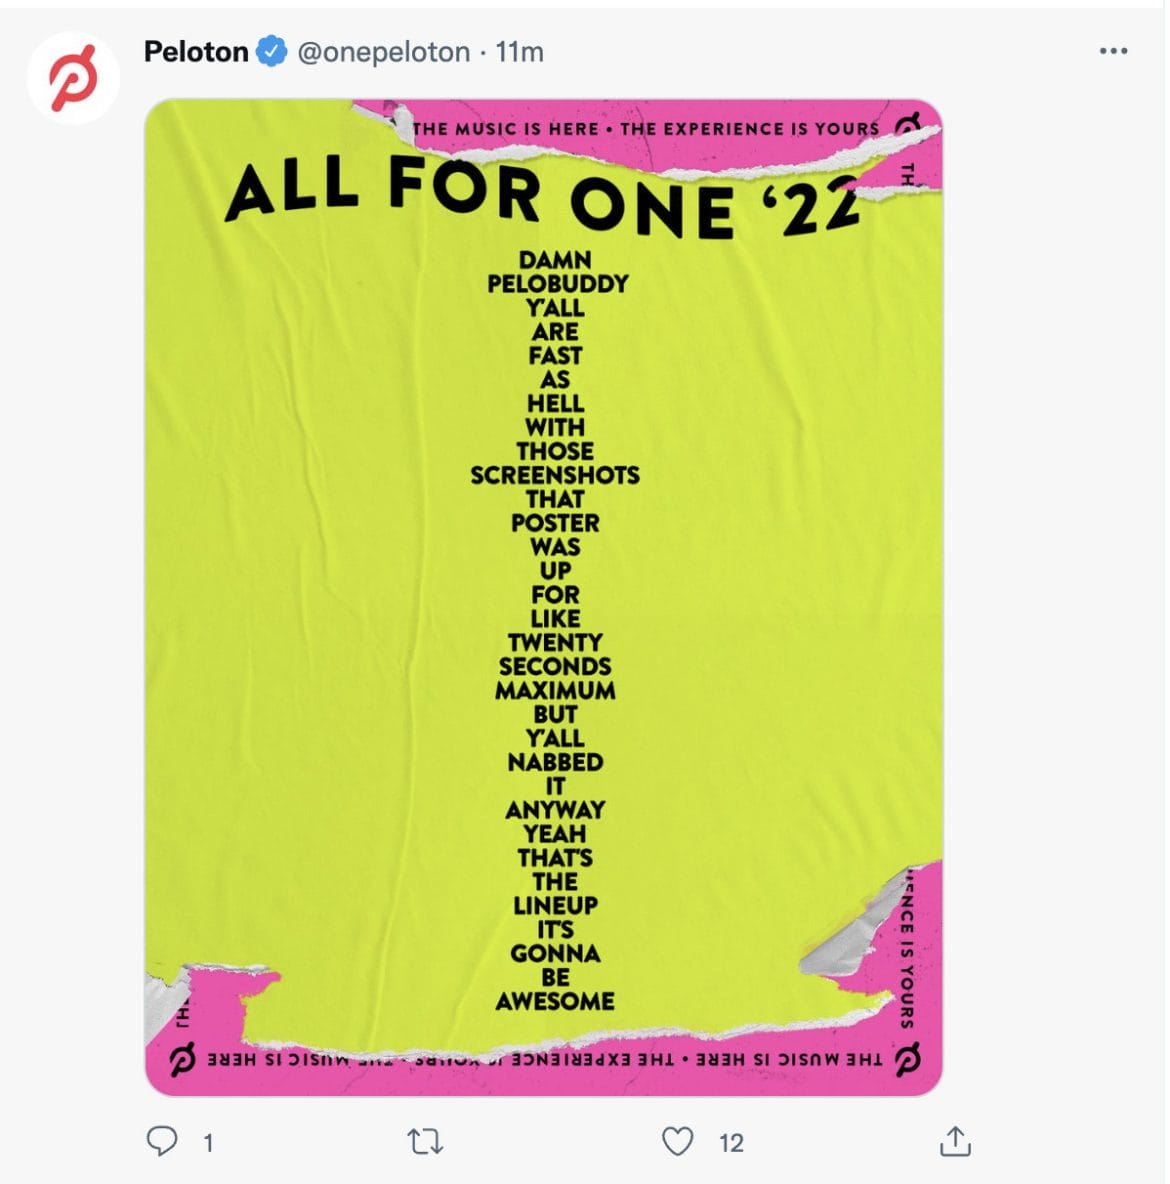 A second image Peloton tweeted and deleted within minutes a few hours later.